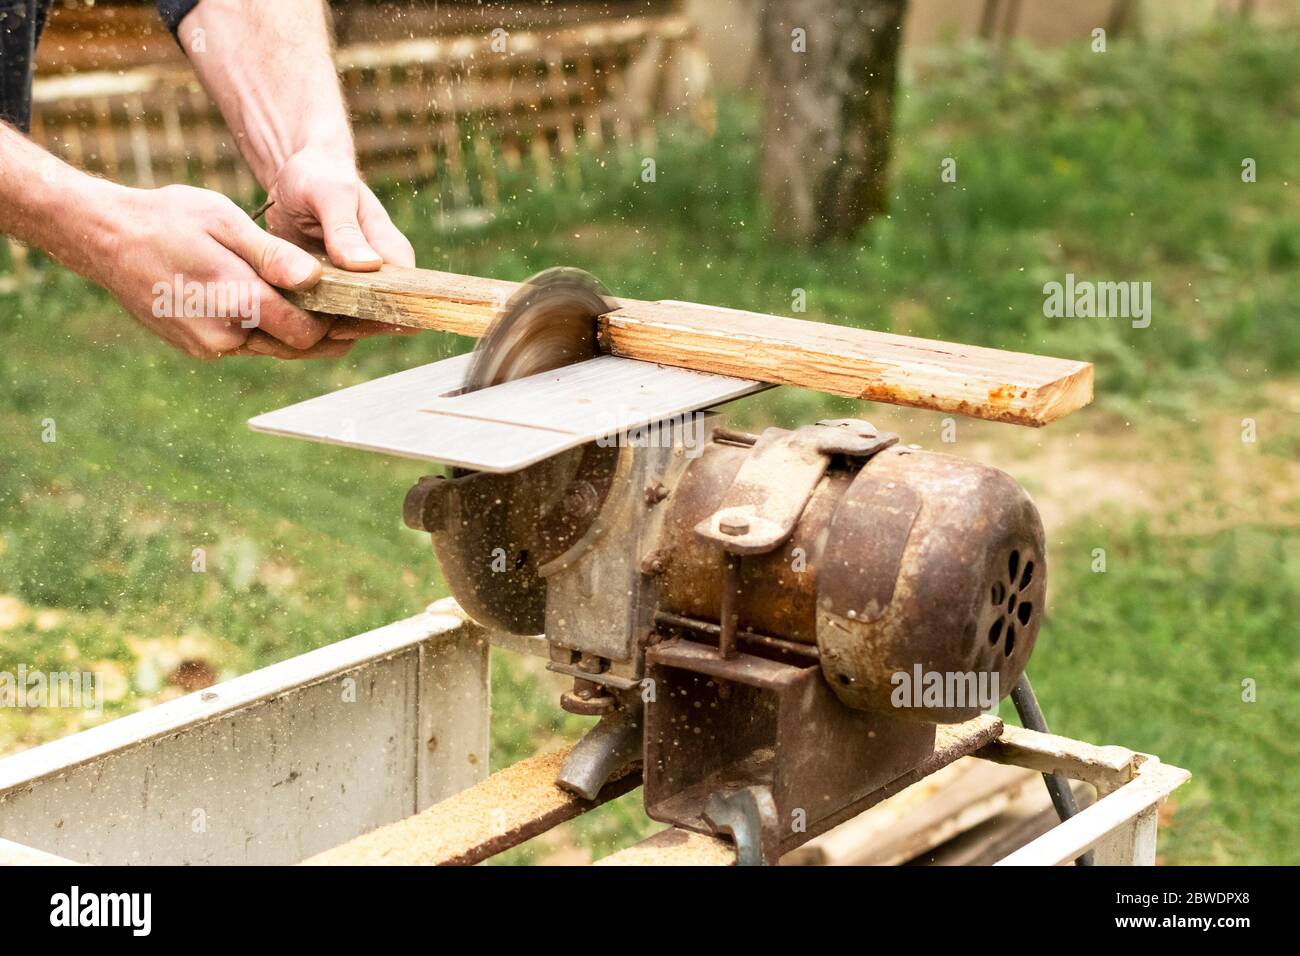 https://c8.alamy.com/comp/2BWDPX8/construction-contractor-worker-using-a-worm-driven-hand-held-circular-saw-to-cut-boards-2BWDPX8.jpg